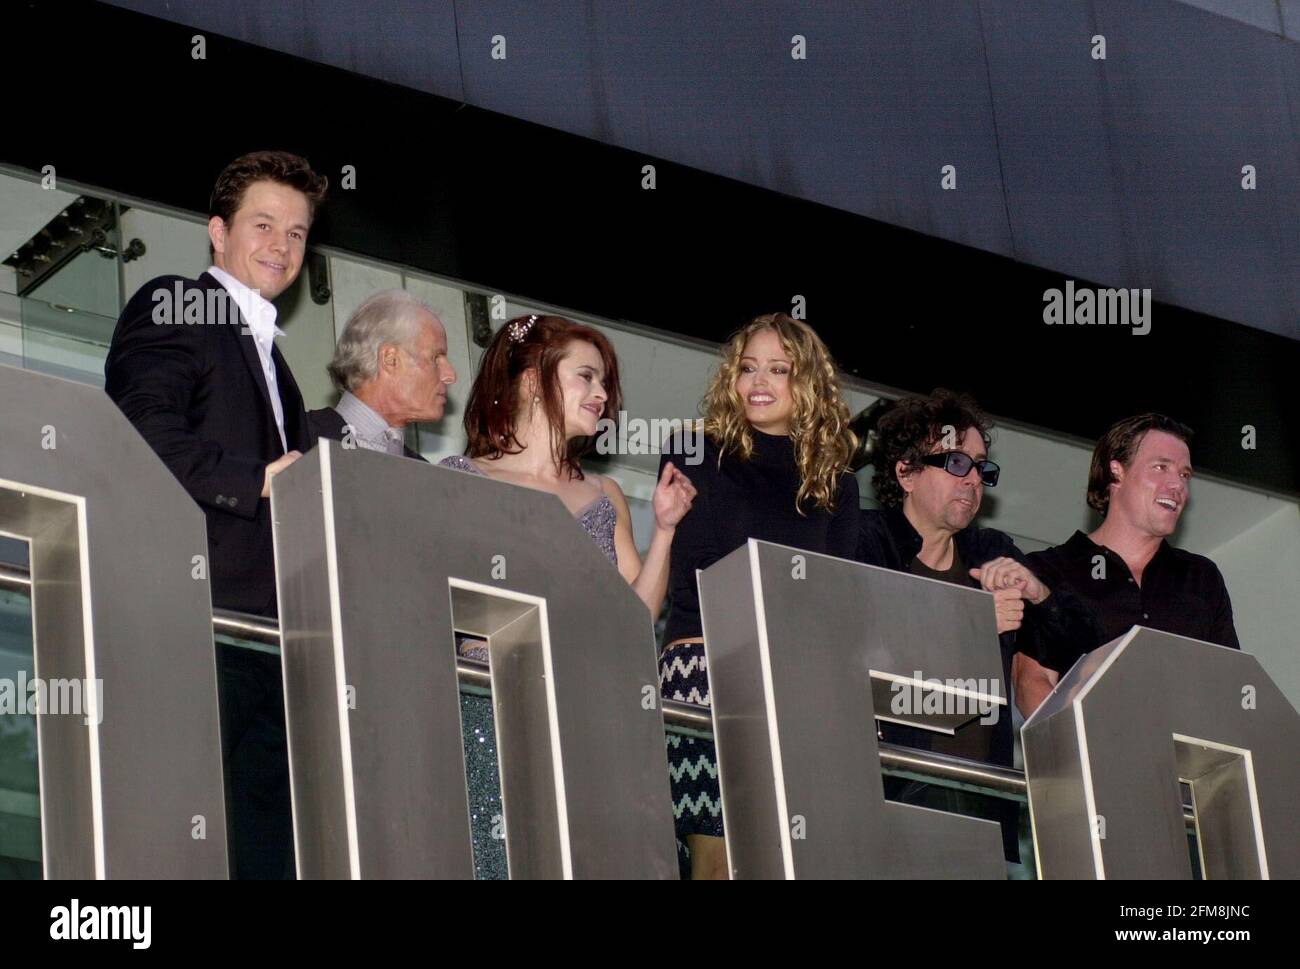 SOME OF THE CAST OF 'PLANET OF THE APES' ALSO WITH DIRECTOR TIM BURTON ) ATTENDING THE FILMS PREMIER THIS EVENING.Mark Wahlberg, helena boham carter, Estella Warren, tim burton (director) Stock Photo